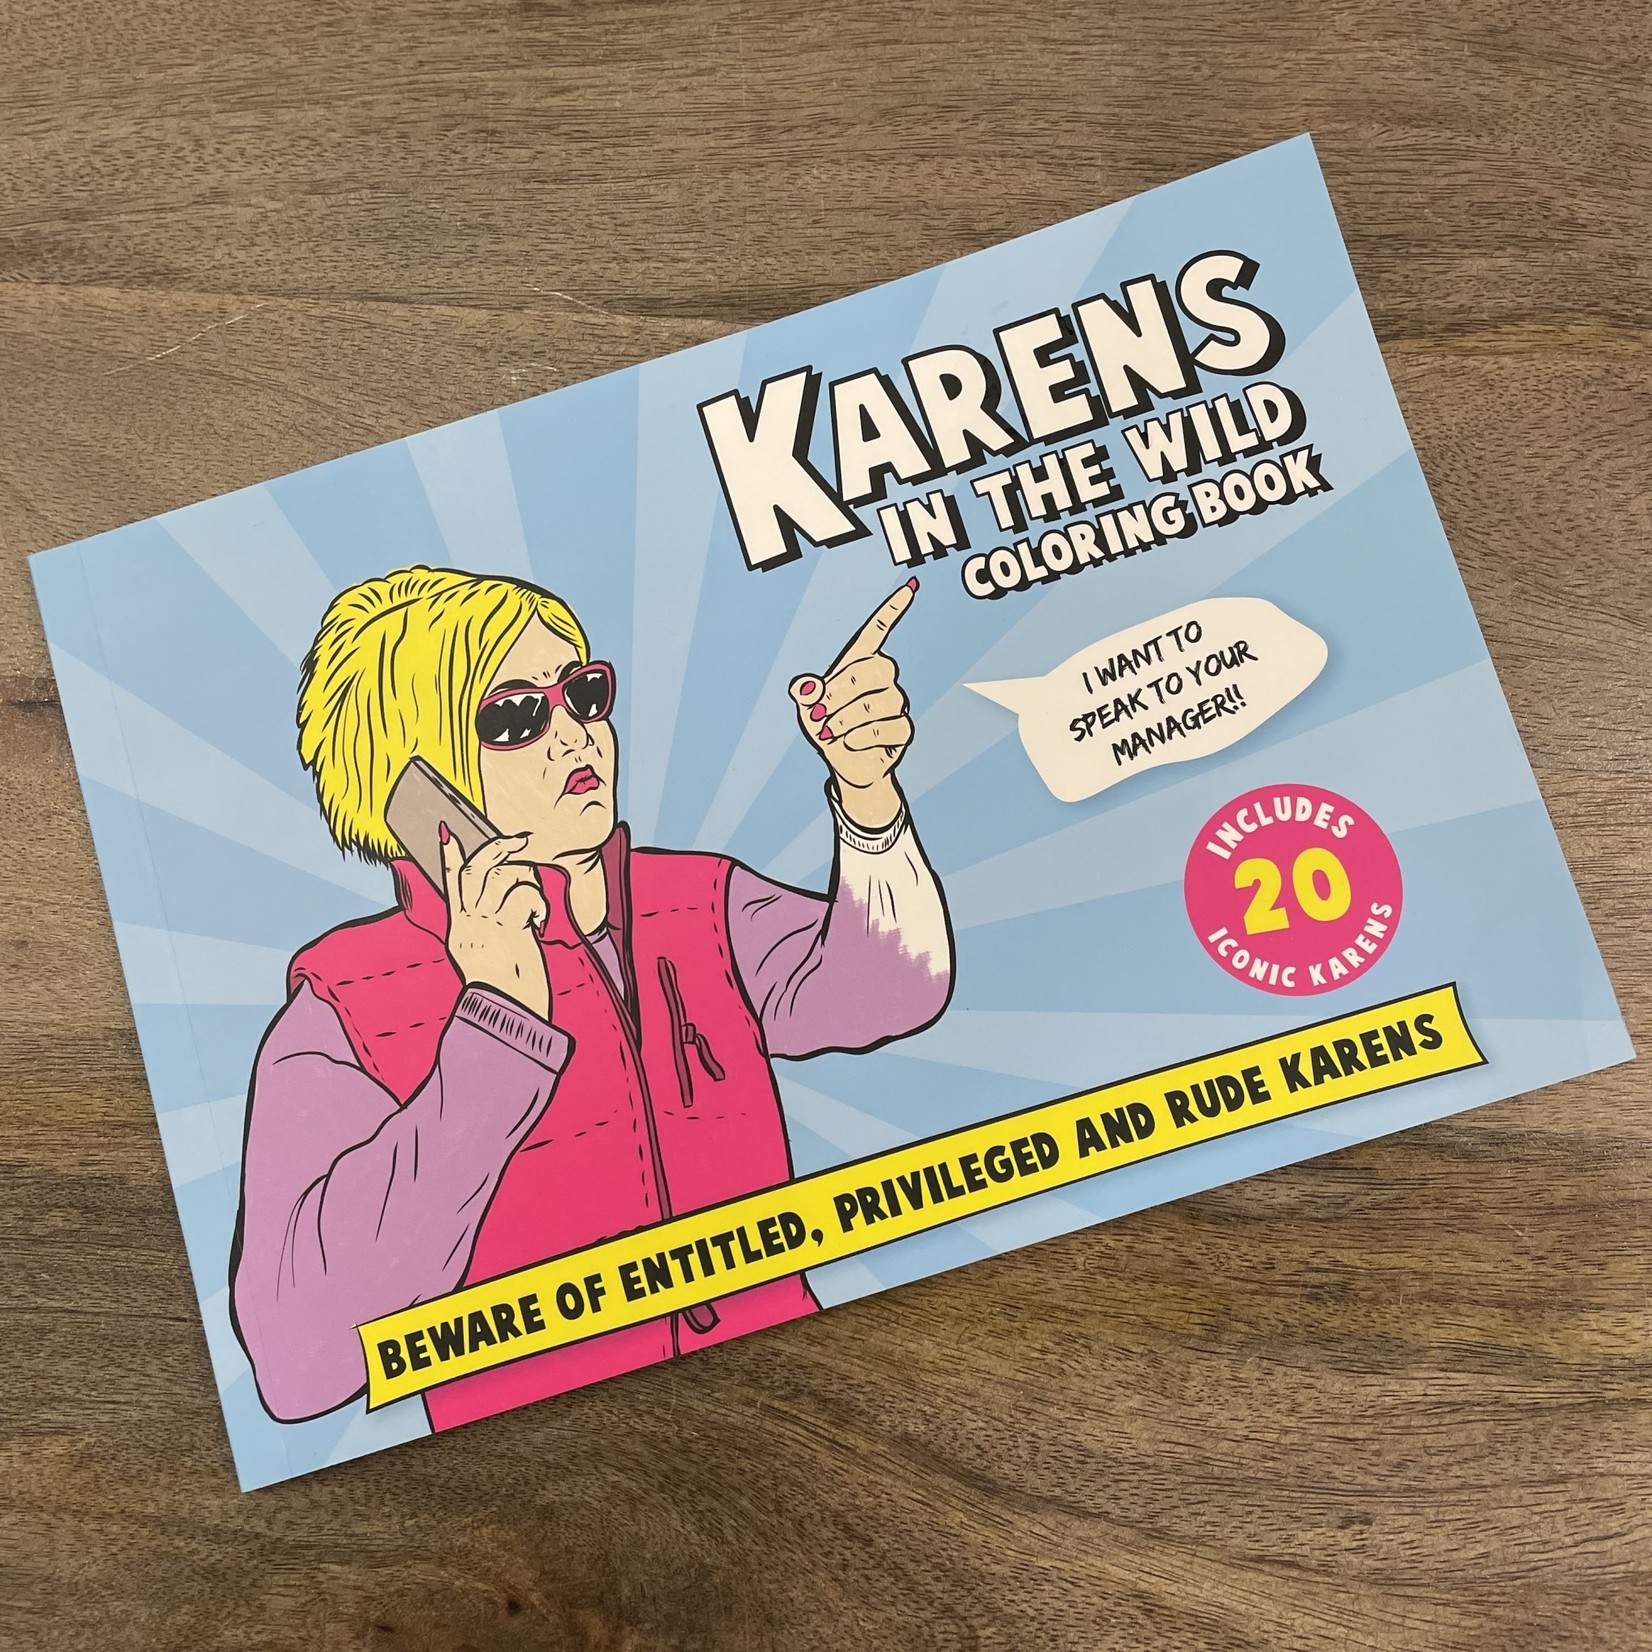 JABCO KARENS IN THE WILD COLOURING BOOK